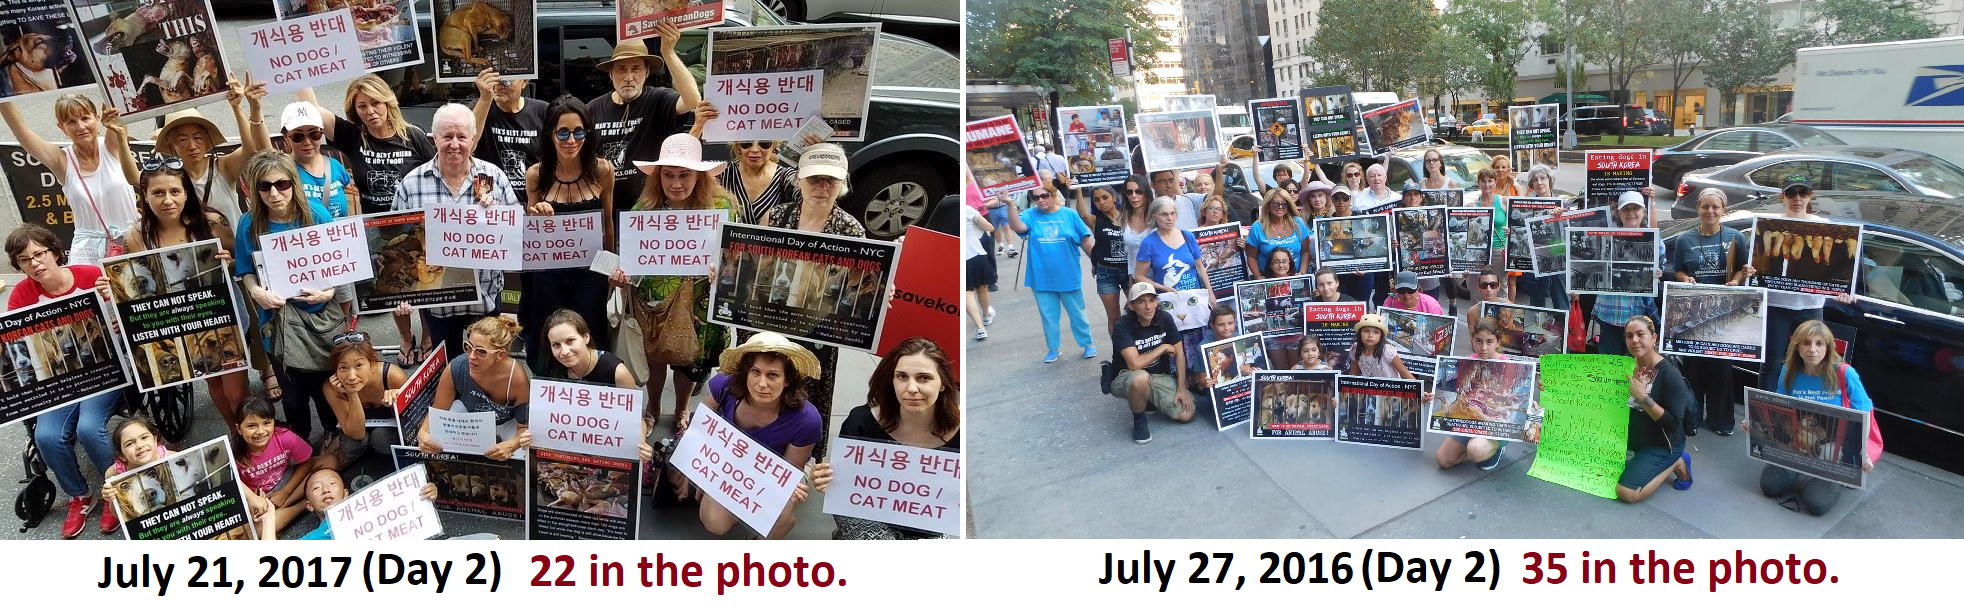 International Day of Action for South Korean Dogs & Cats (Day 3)